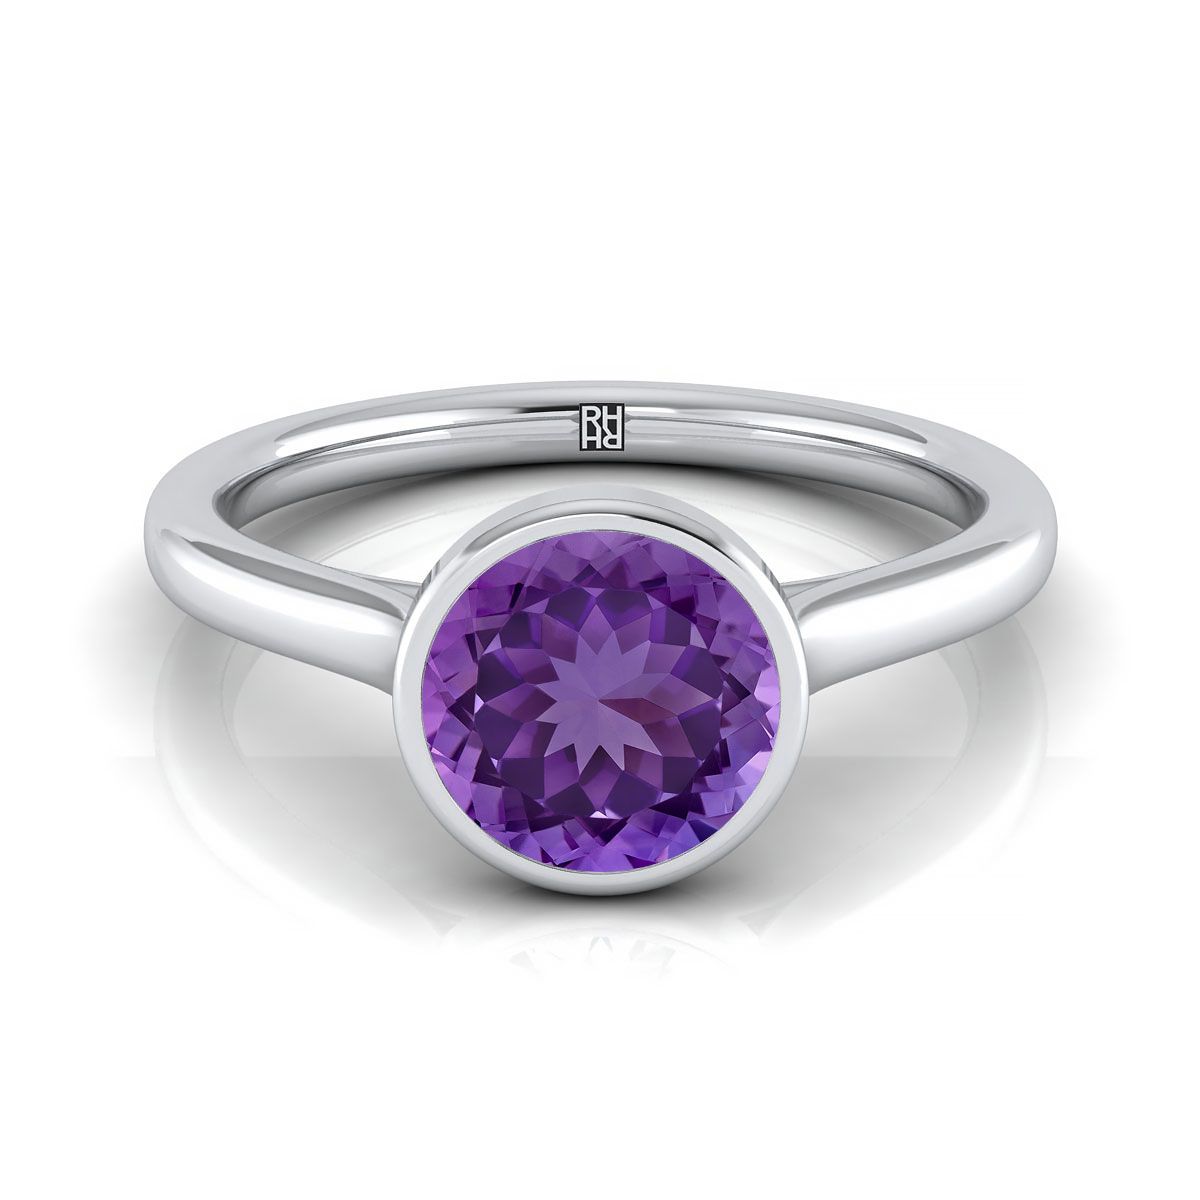 14K White Gold Round Brilliant Amethyst Simple Bezel Solitaire Engagement Ring